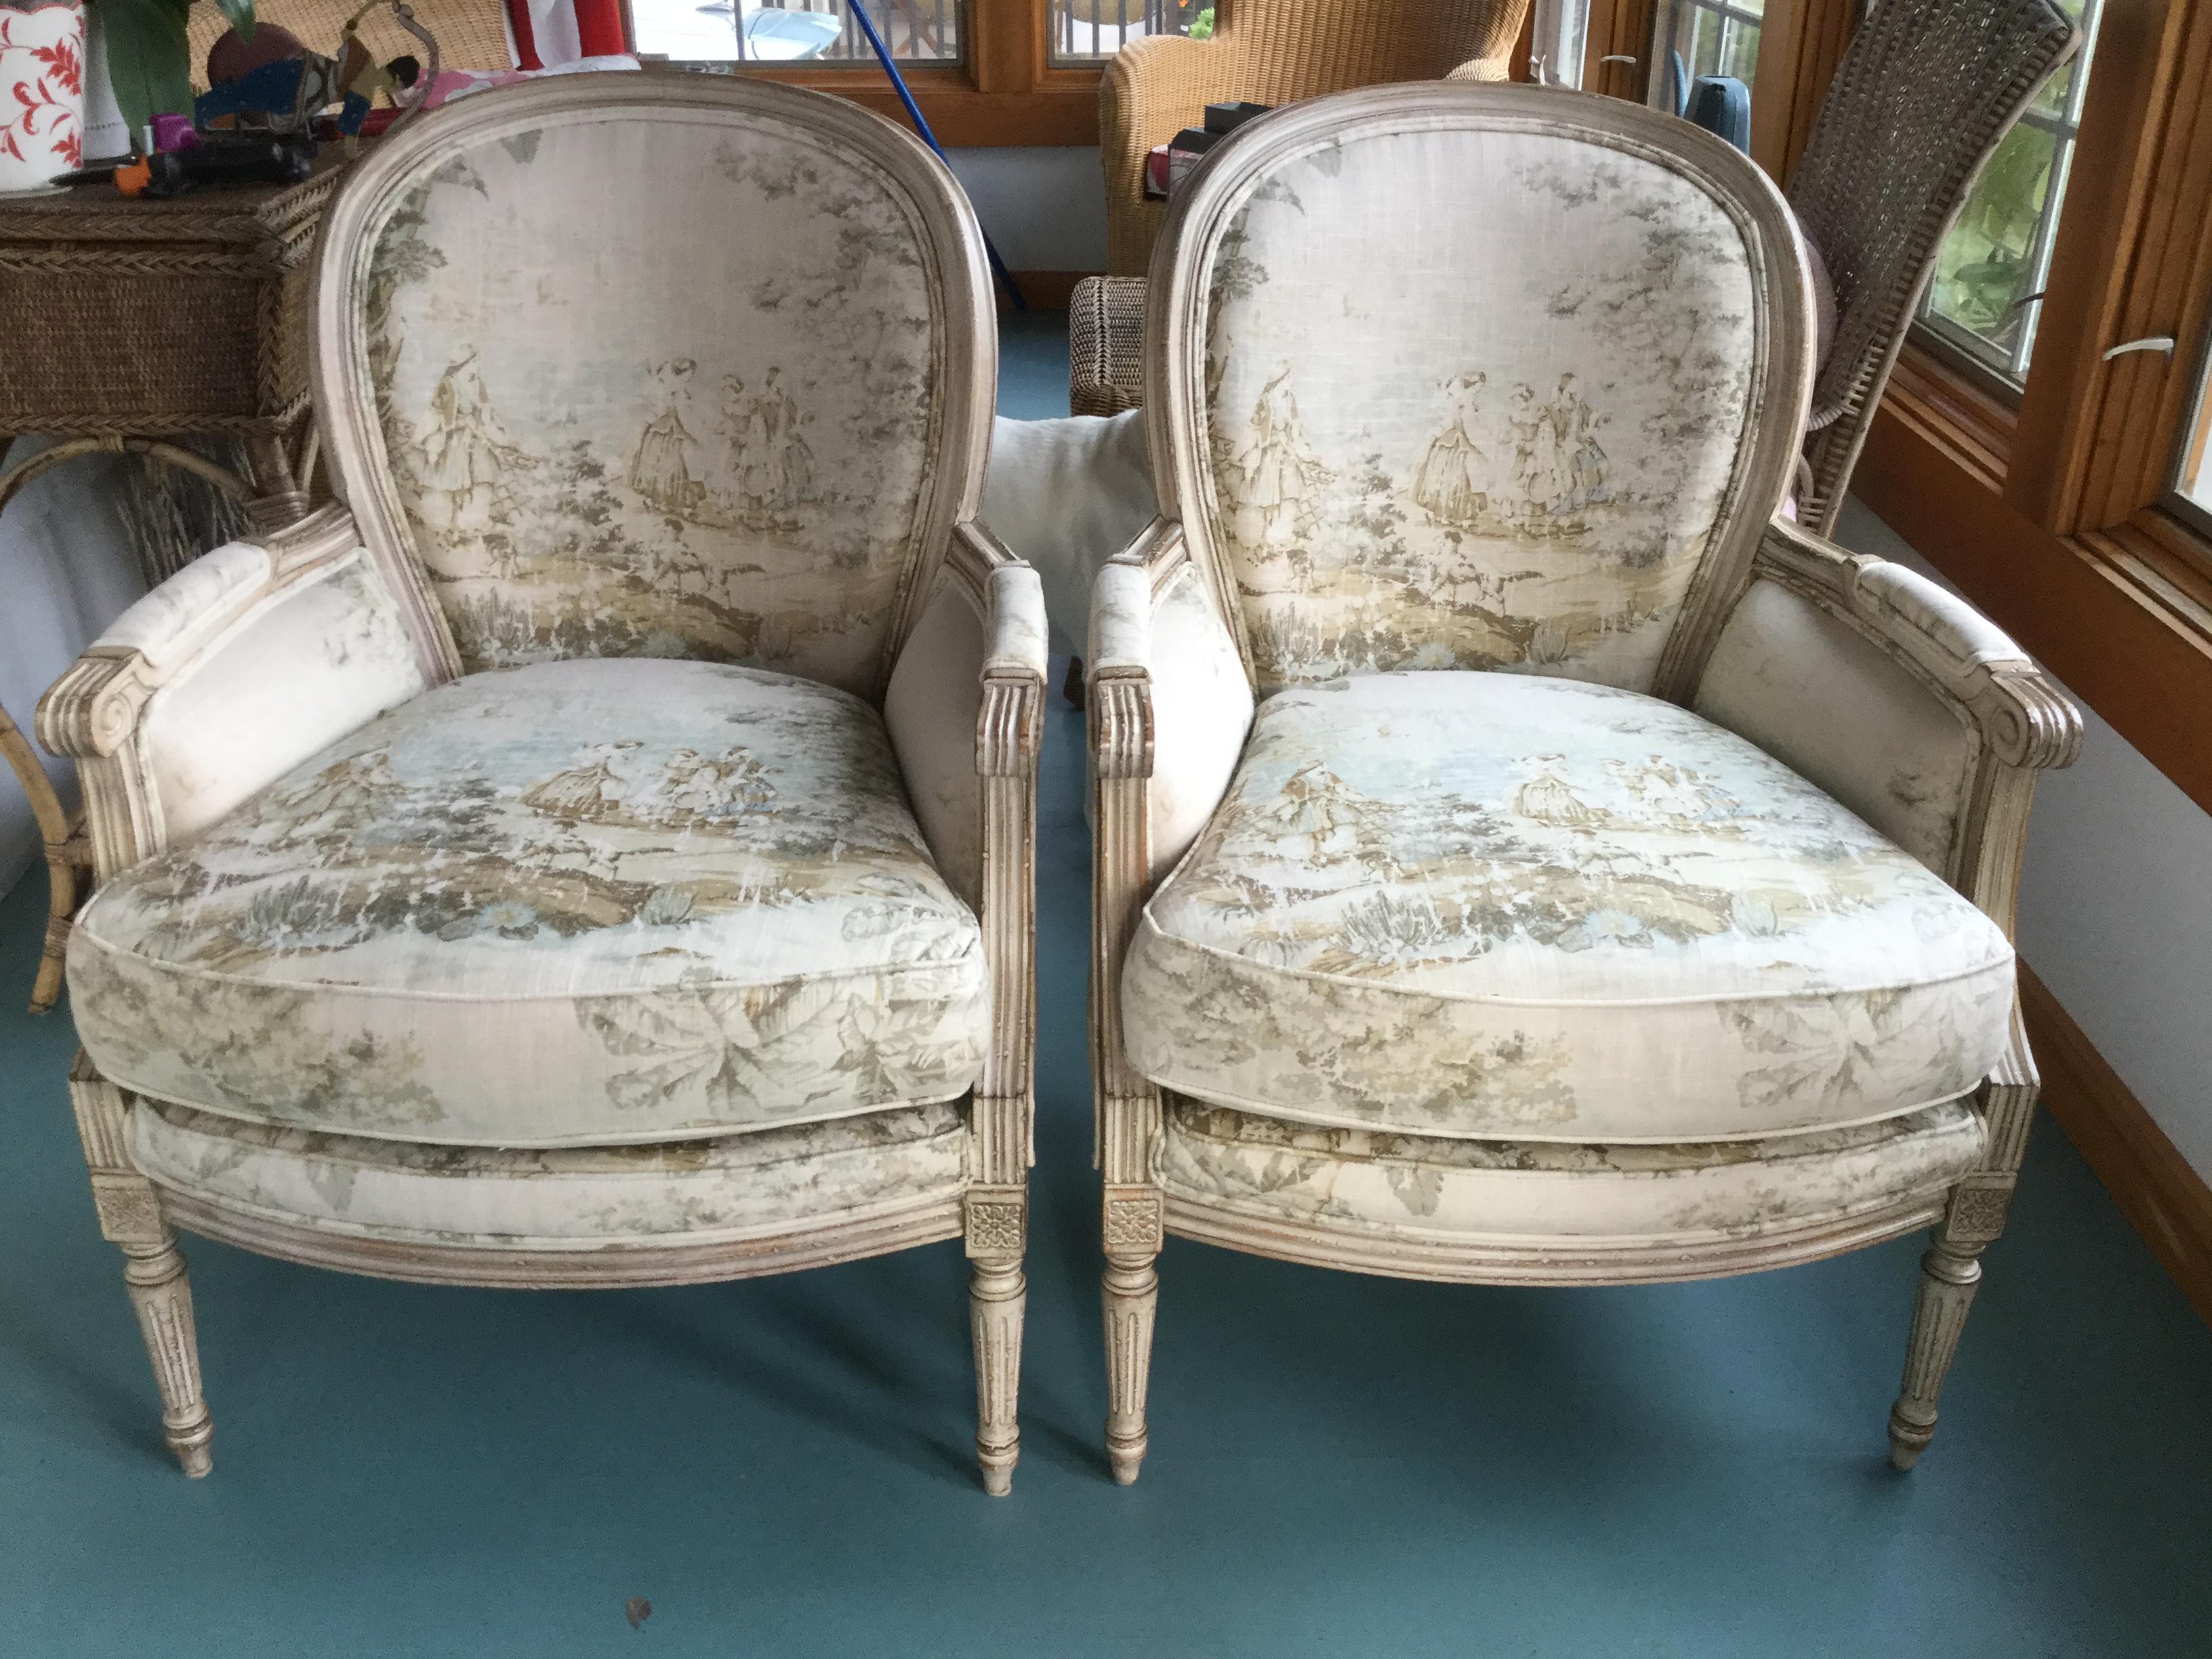 20th Century Pair of Louis XVI Style Painted Chairs